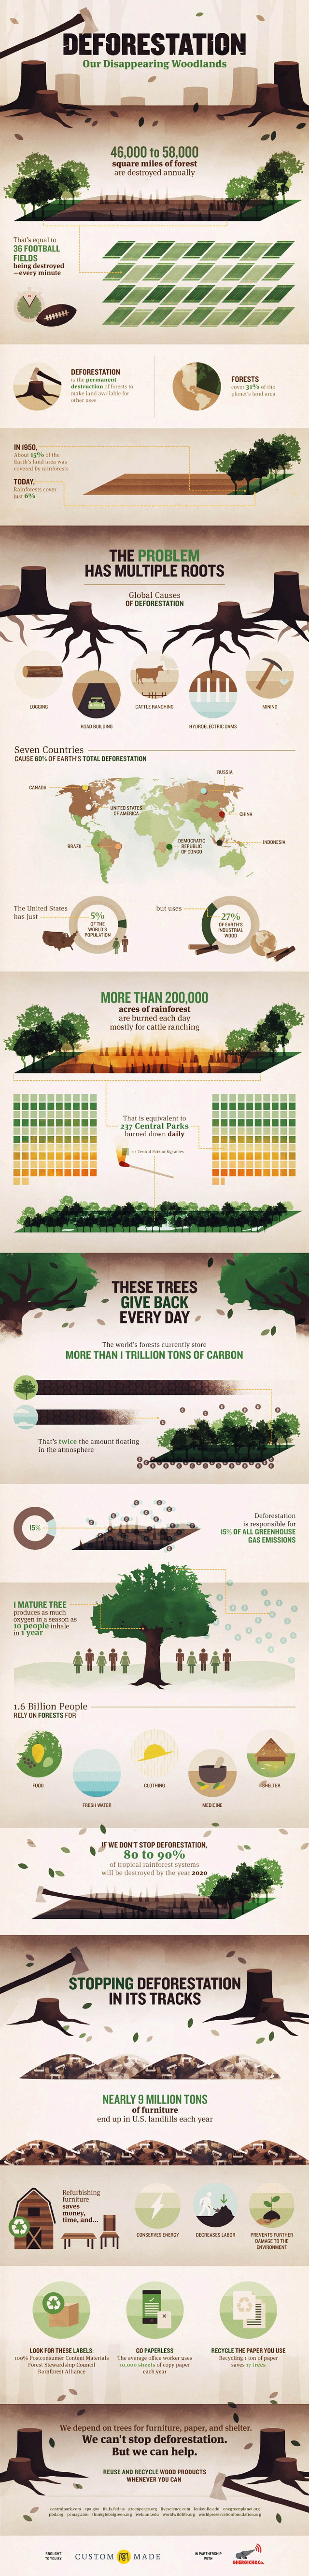 Negative Impacts of Deforestation Environmental Infographic